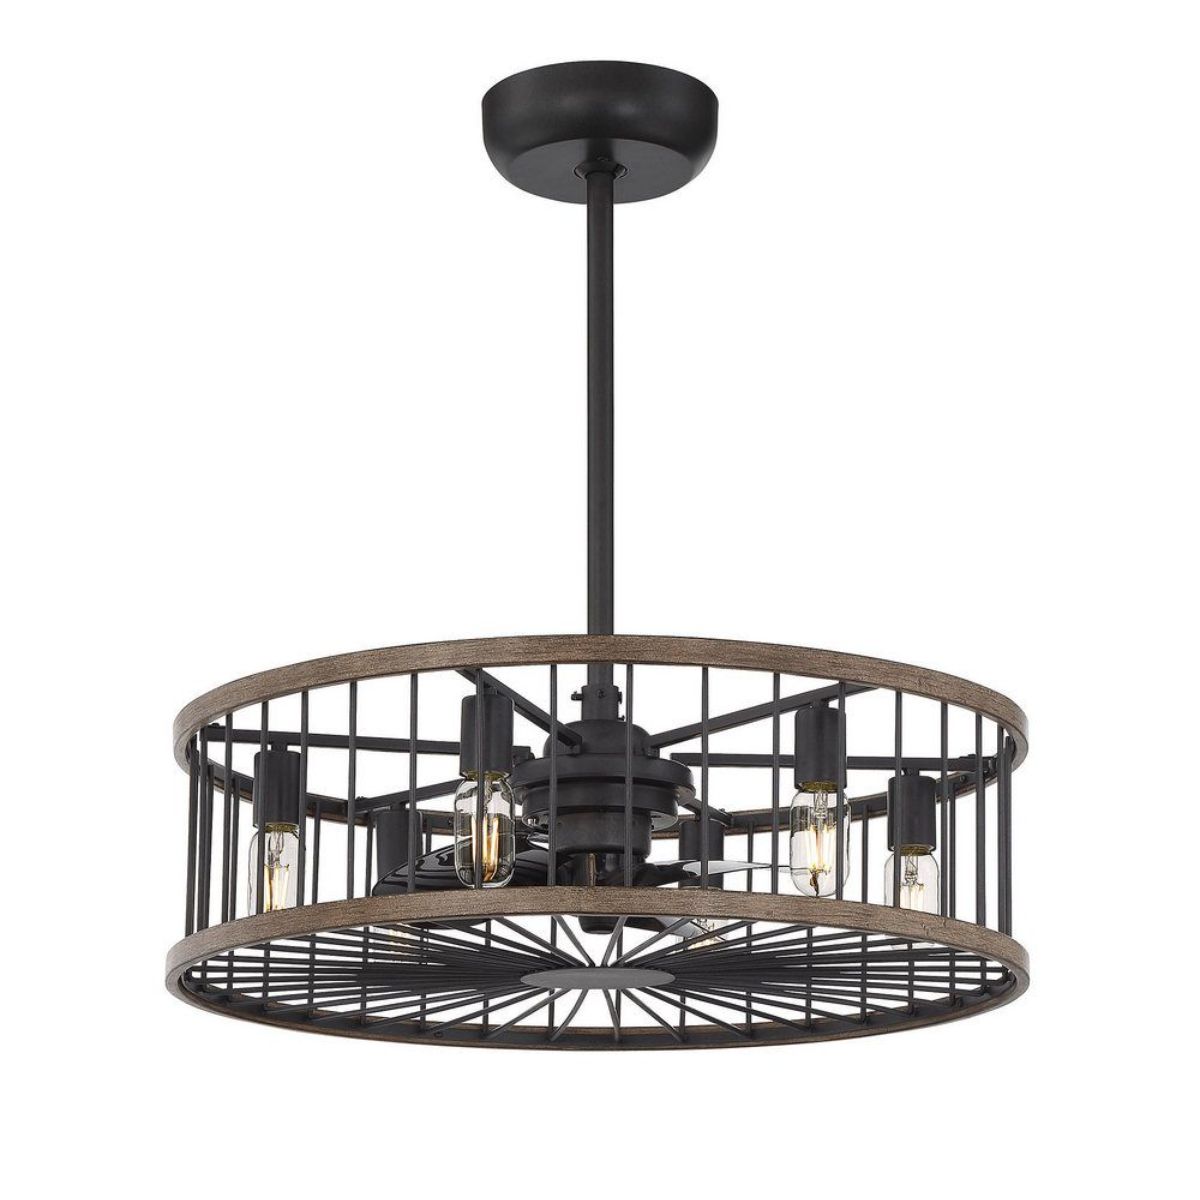 Kona 26 Inch Chandelier Outdoor Ceiling Fan With Light And Remote, Sapele Finish